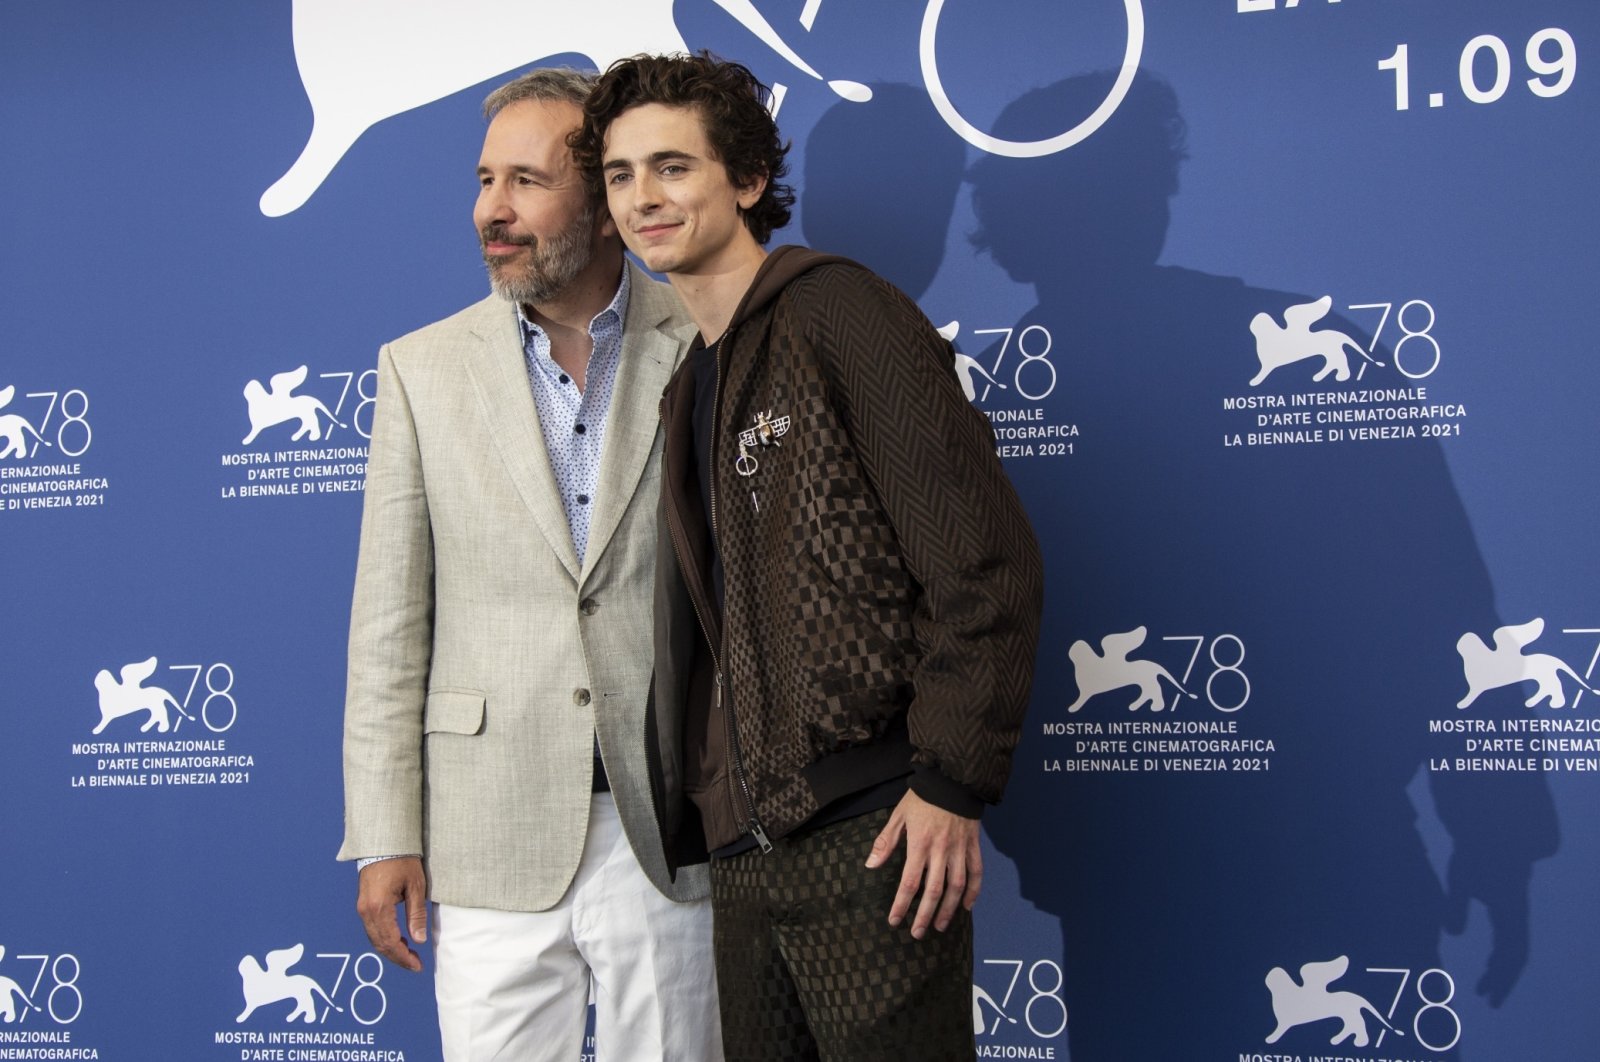 Denis Villeneuve (L), and Timothee Chalamet pose for photographers at the photocell for the film “Dune” at the 78th Venice Film Festival, in Venice, Italy, Sept. 3, 2021. (AP Photo)